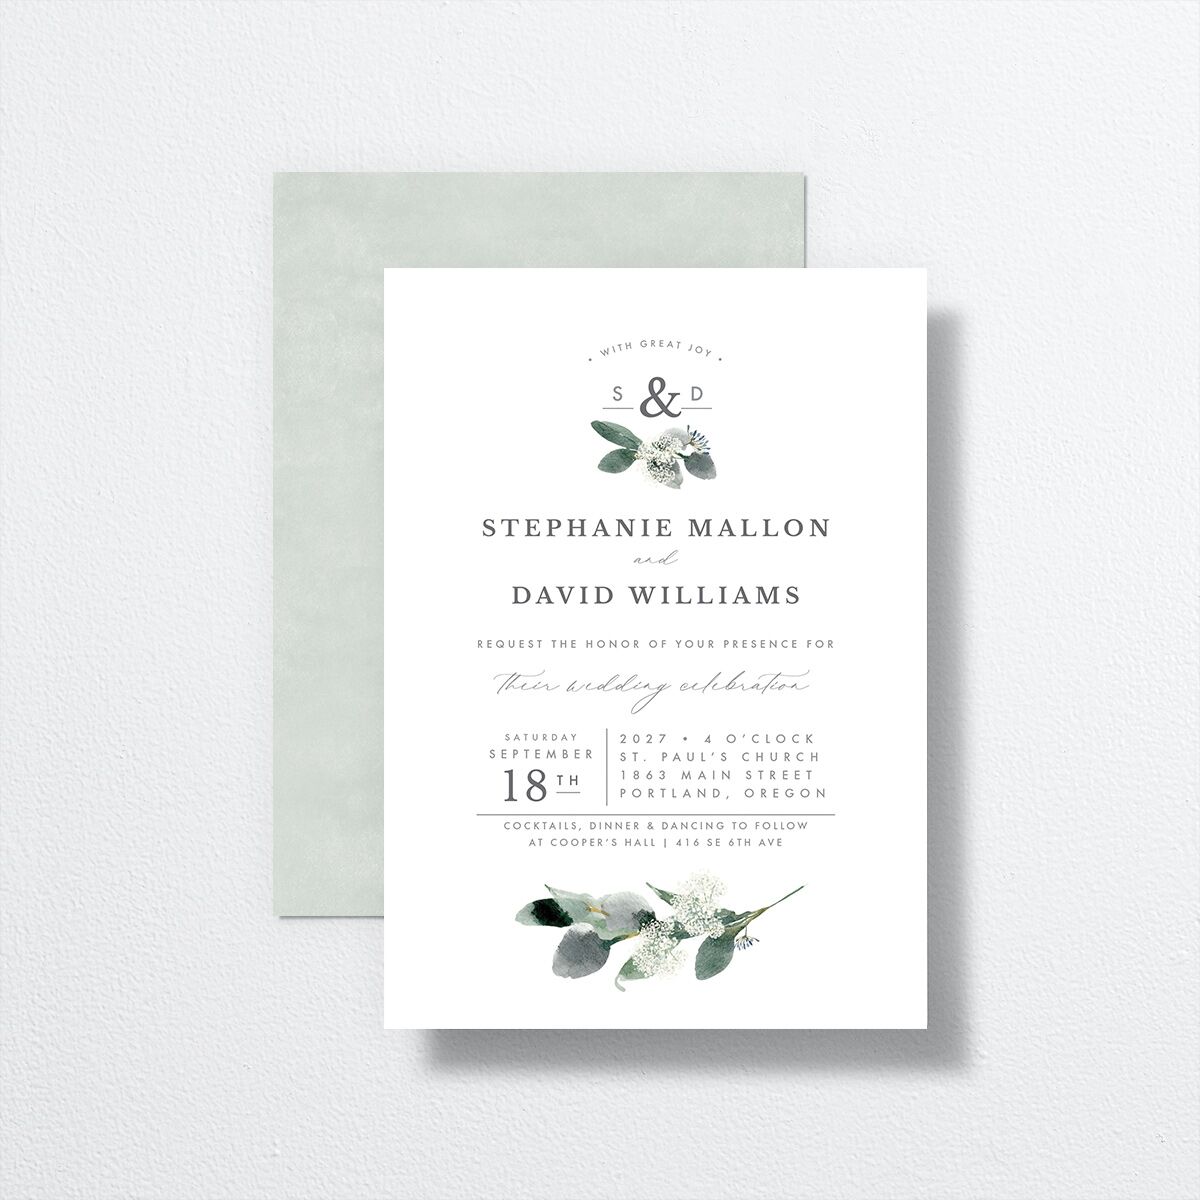 Elegant Greenery Wedding Invitations front-and-back in white